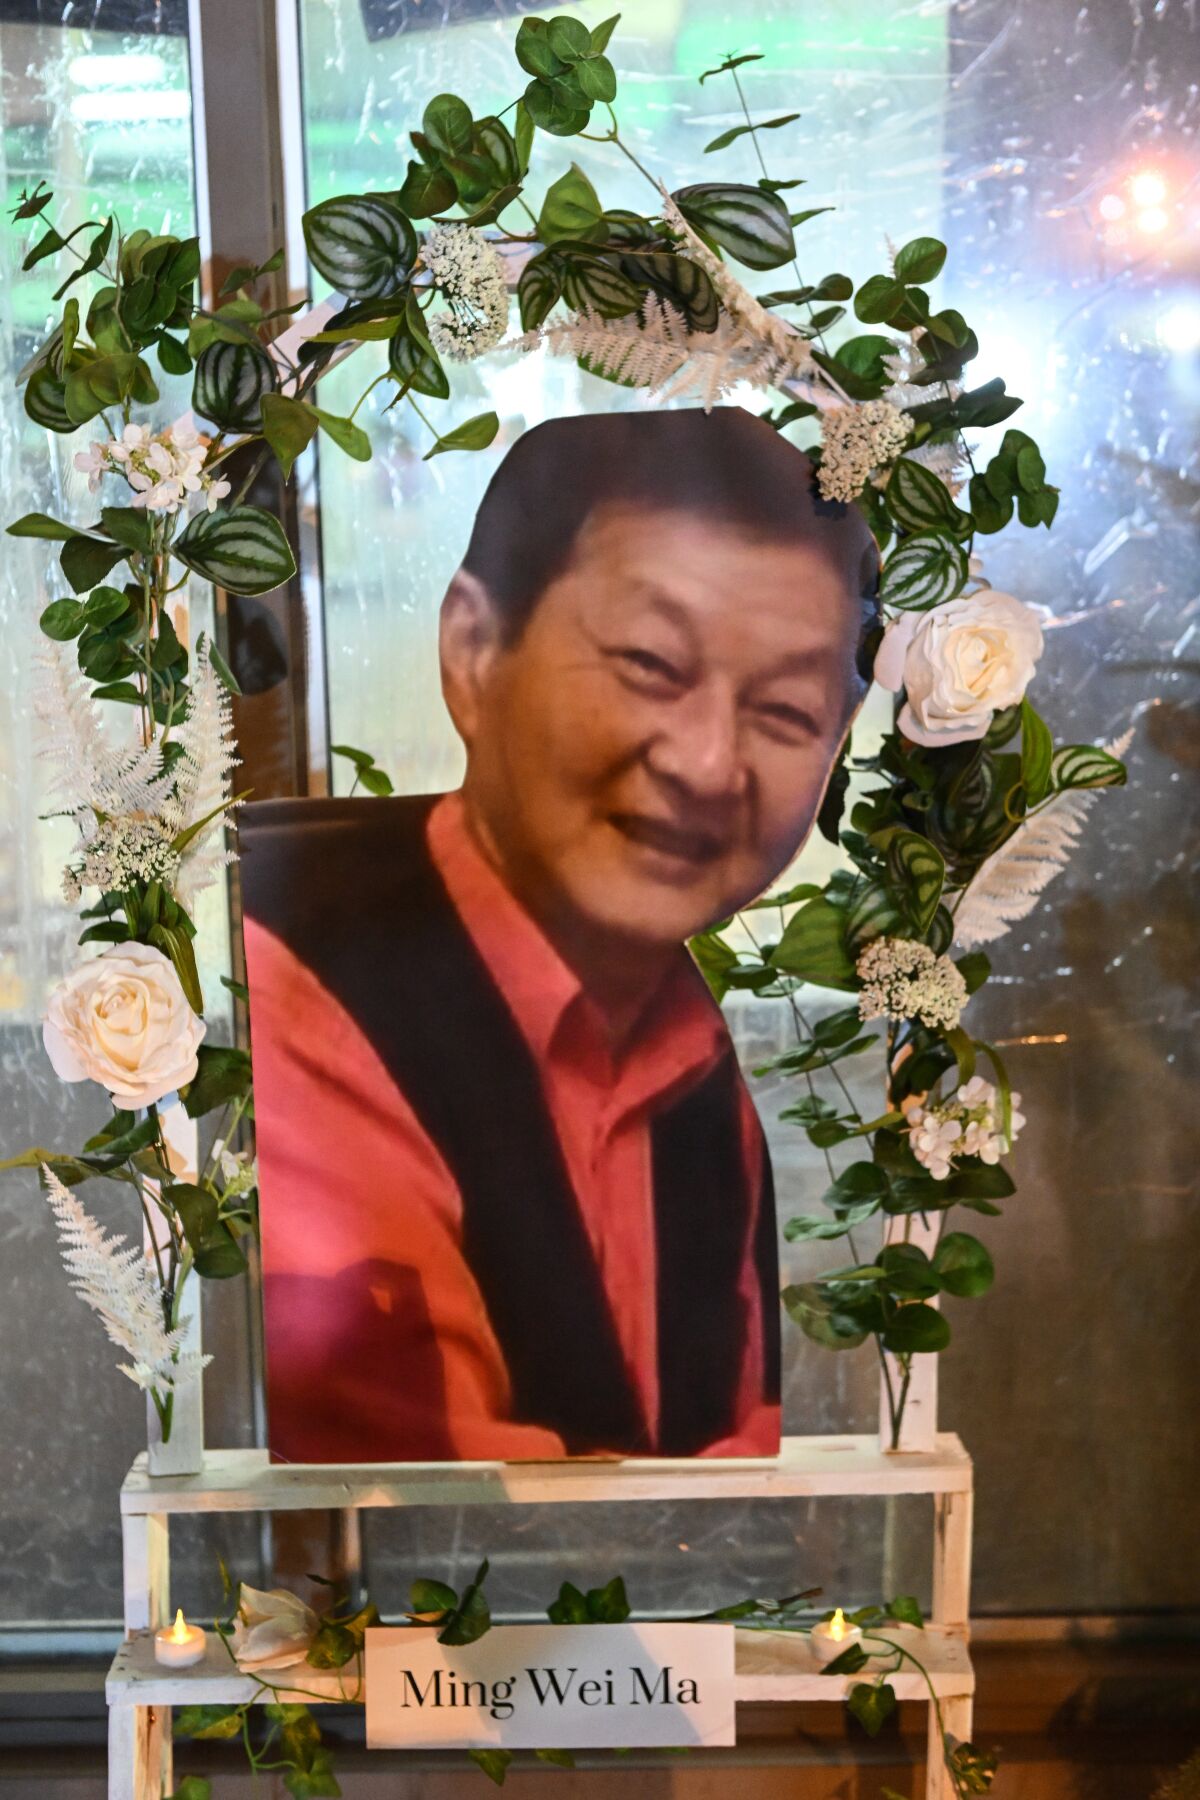  A portrait of Ming Wei Ma sits on display in front of the dance studio.